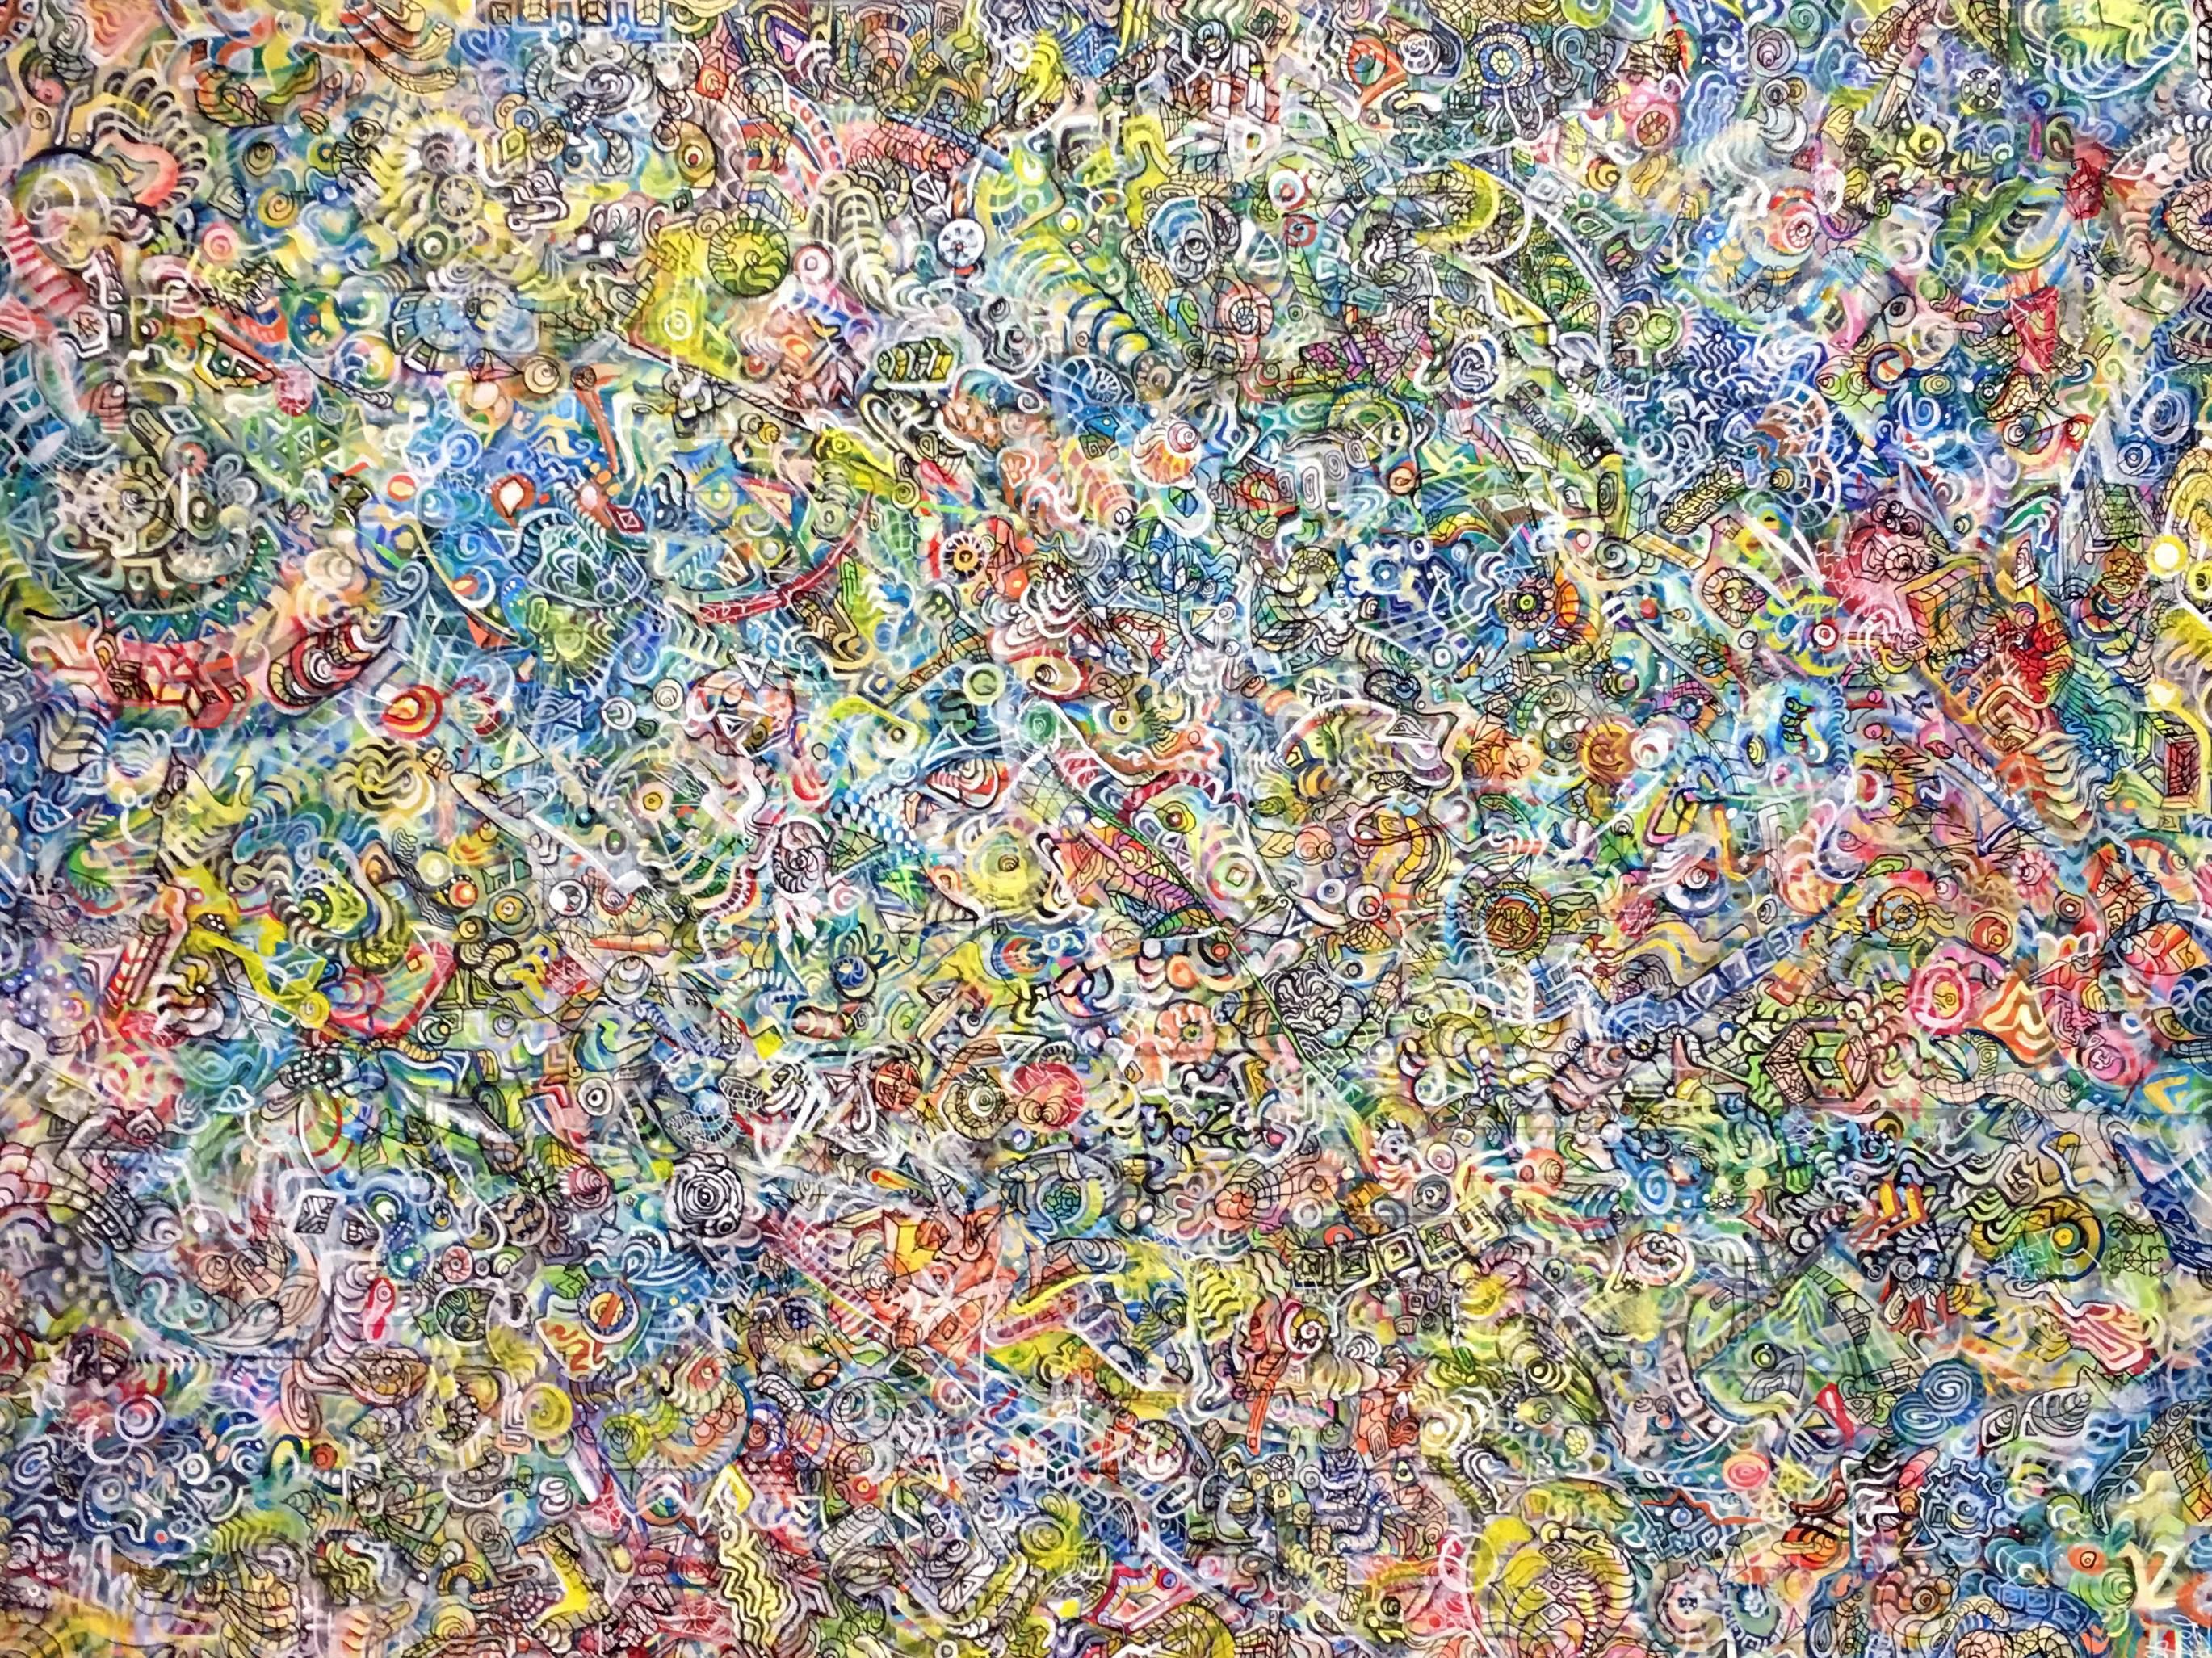 Ethan Meyer’s work is an obsession with densely intricate patterns that map the inner landscapes of consciousness. As the viewer attempts to chart the patterns, the overall effect is of a space that is both rhythmic and organic. Using markings that